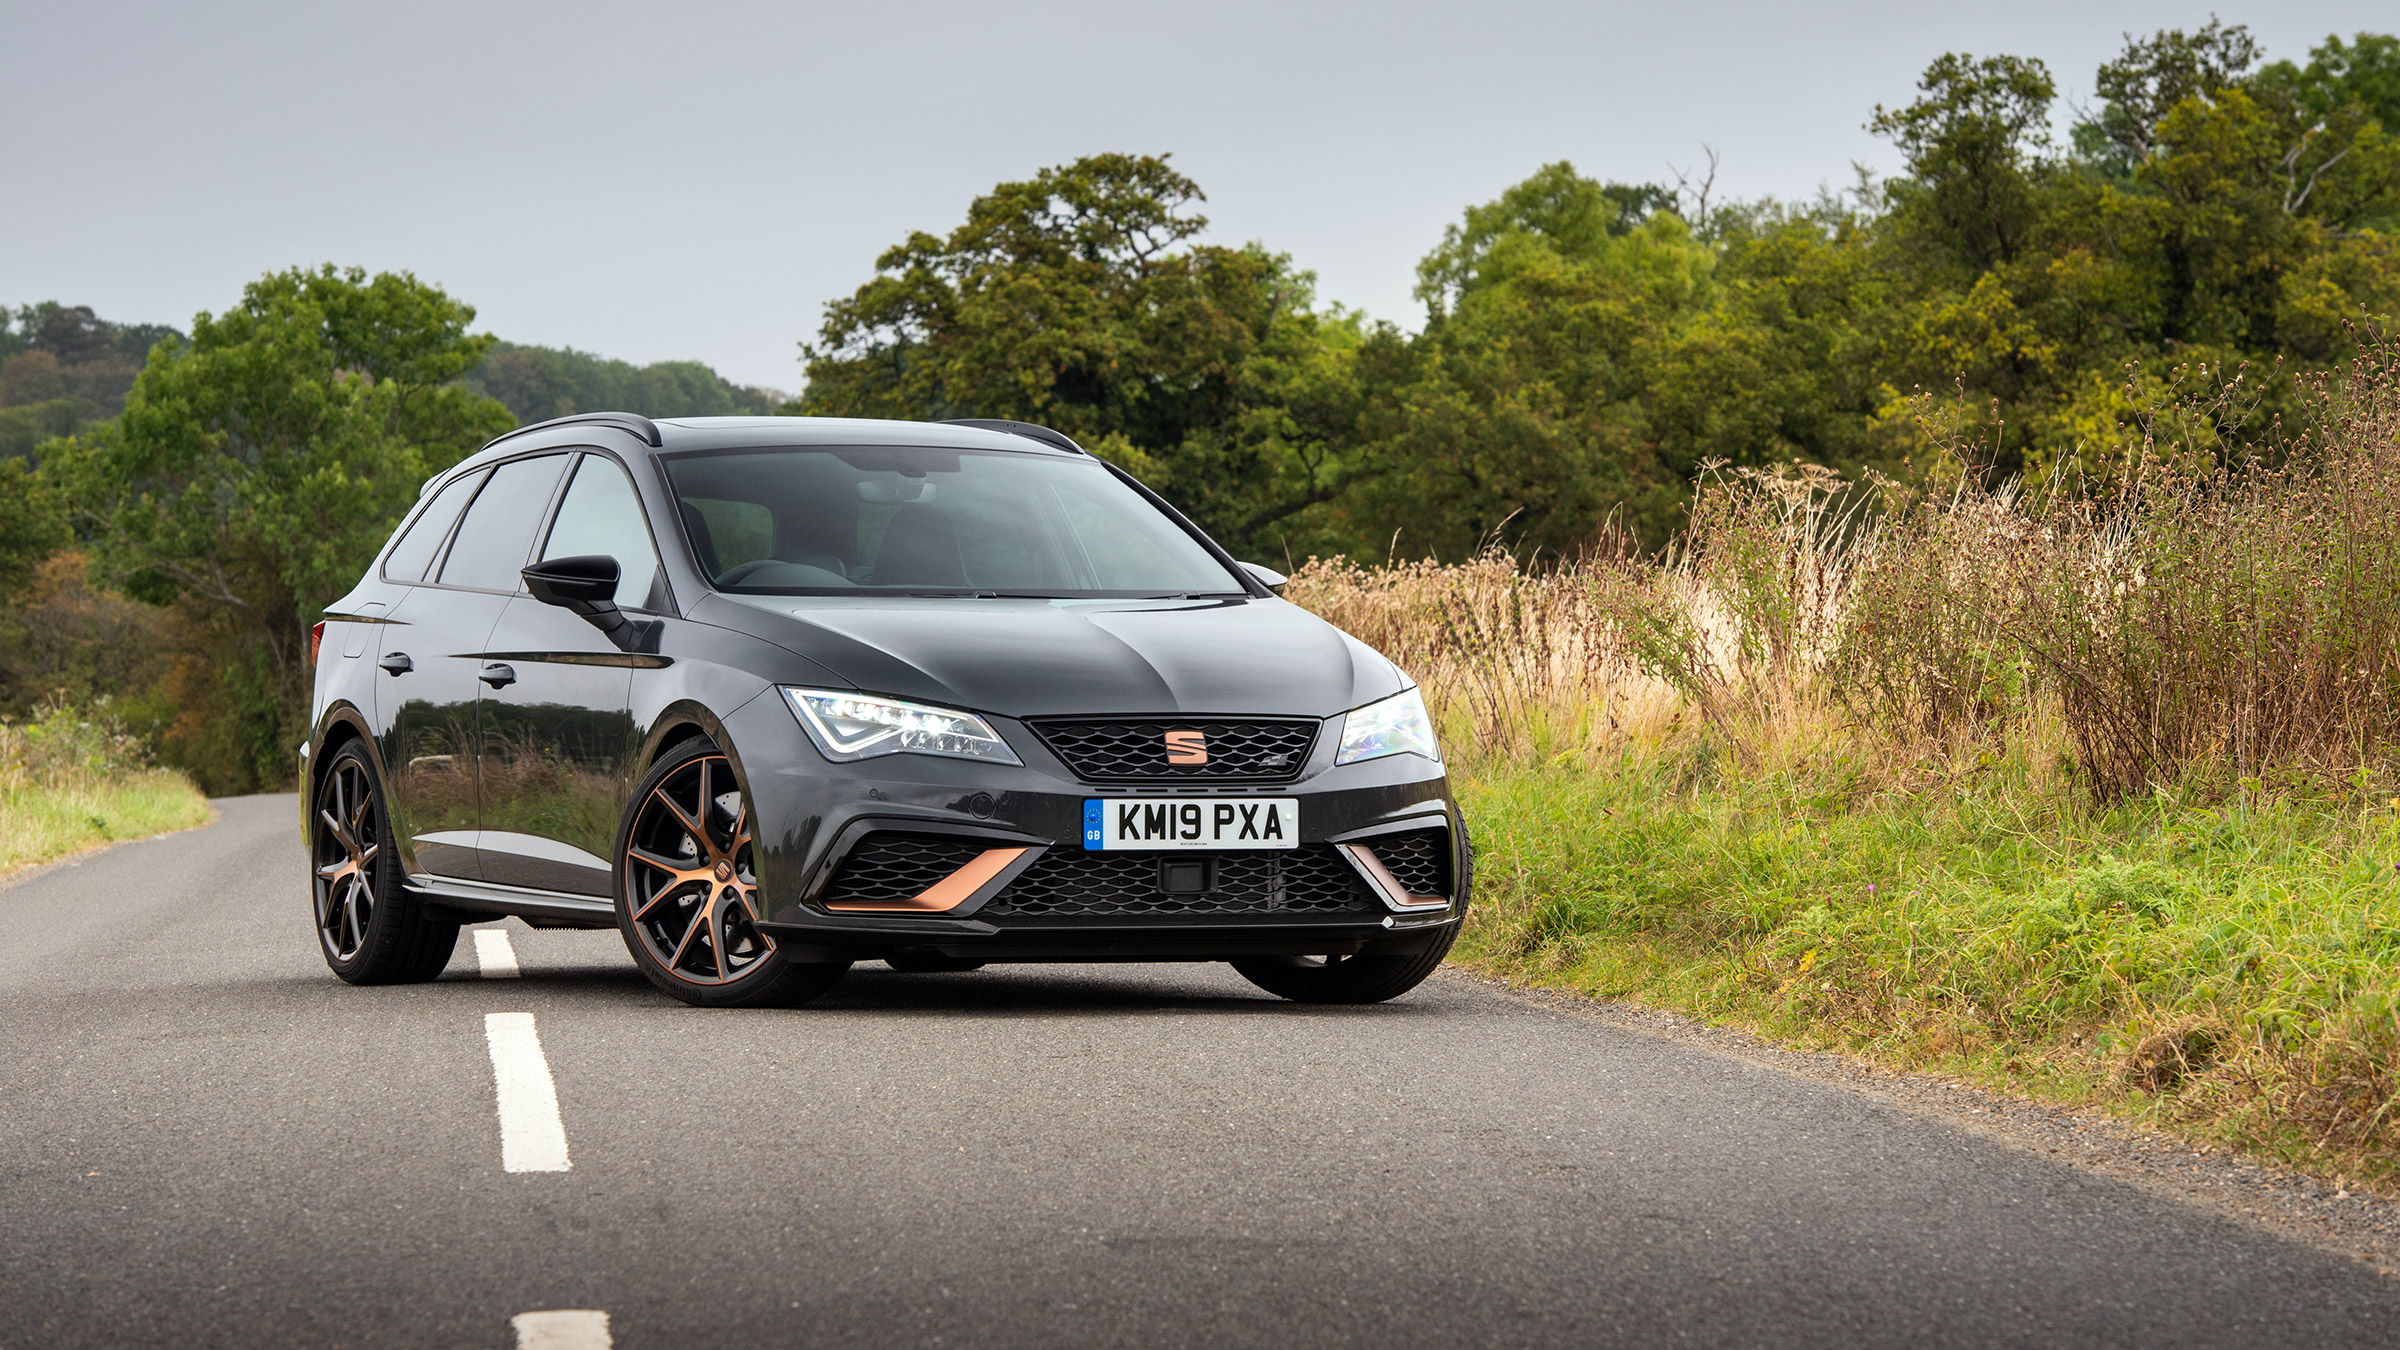 Seat Leon Cupra R St Abt 2020 Review Spicy Spanish Dish Gets Even More Sizzle Evo